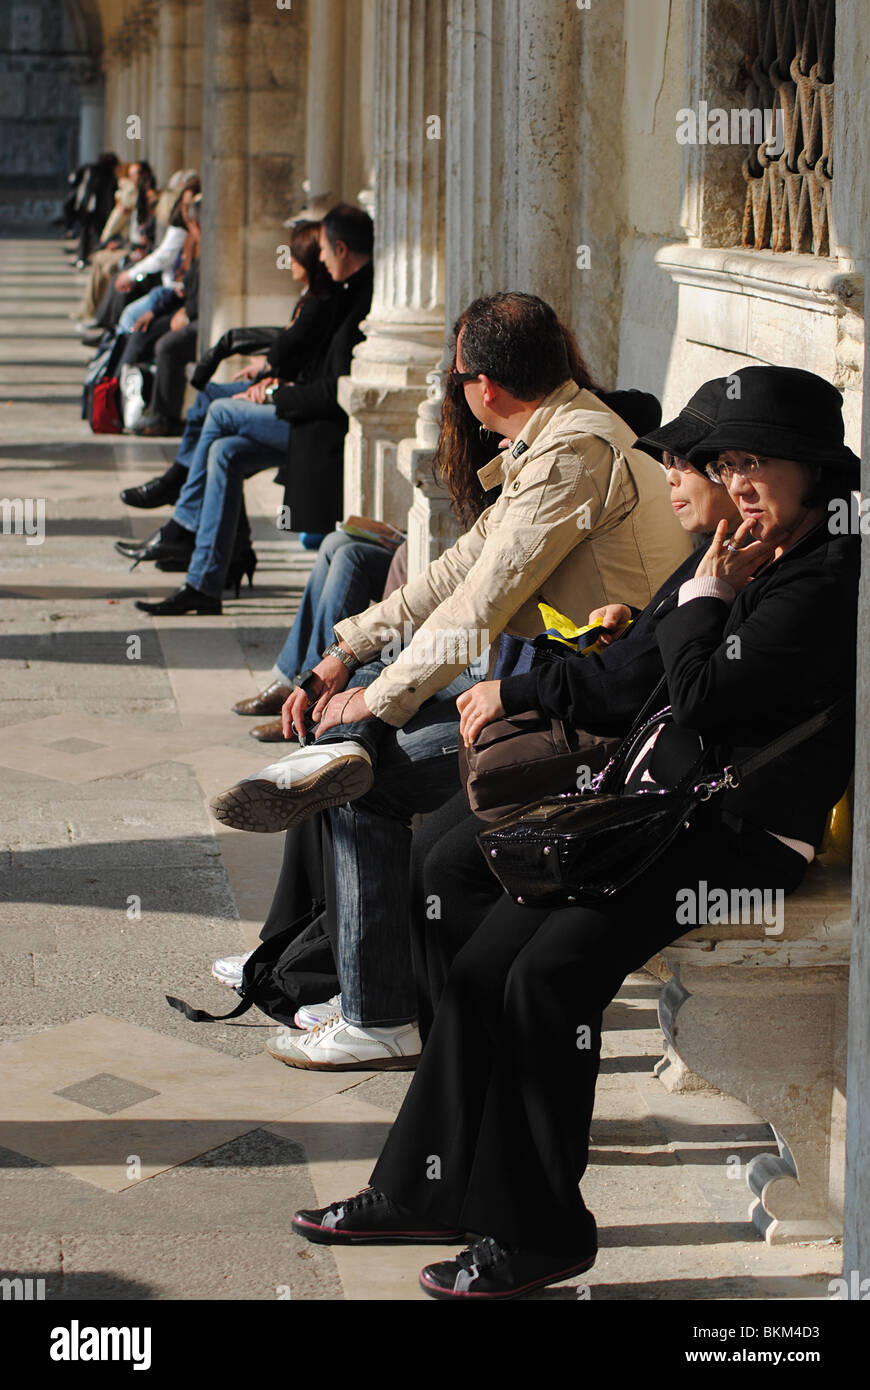 Tourists sit on benches in St Mark's Square, venice, Italy Stock Photo